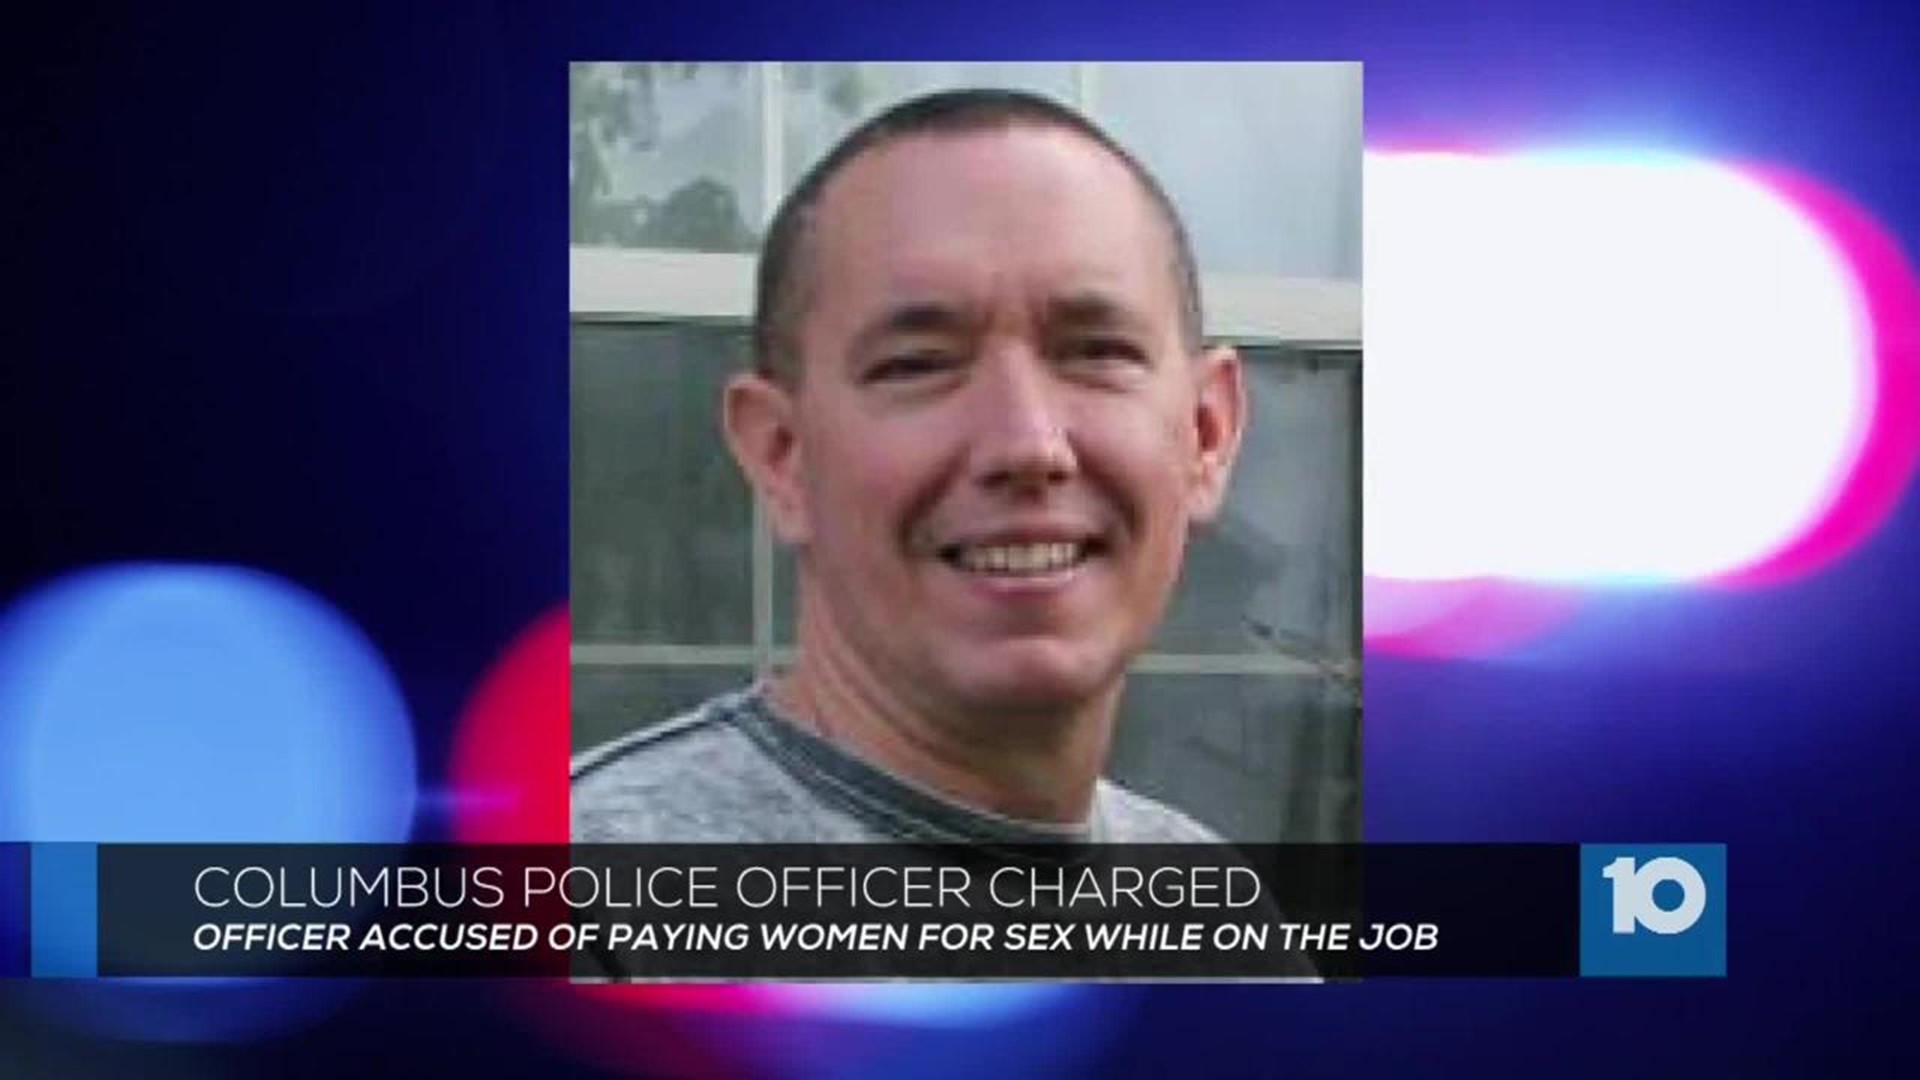 Columbus police officer charged with paying for sex on the job 10tv picture